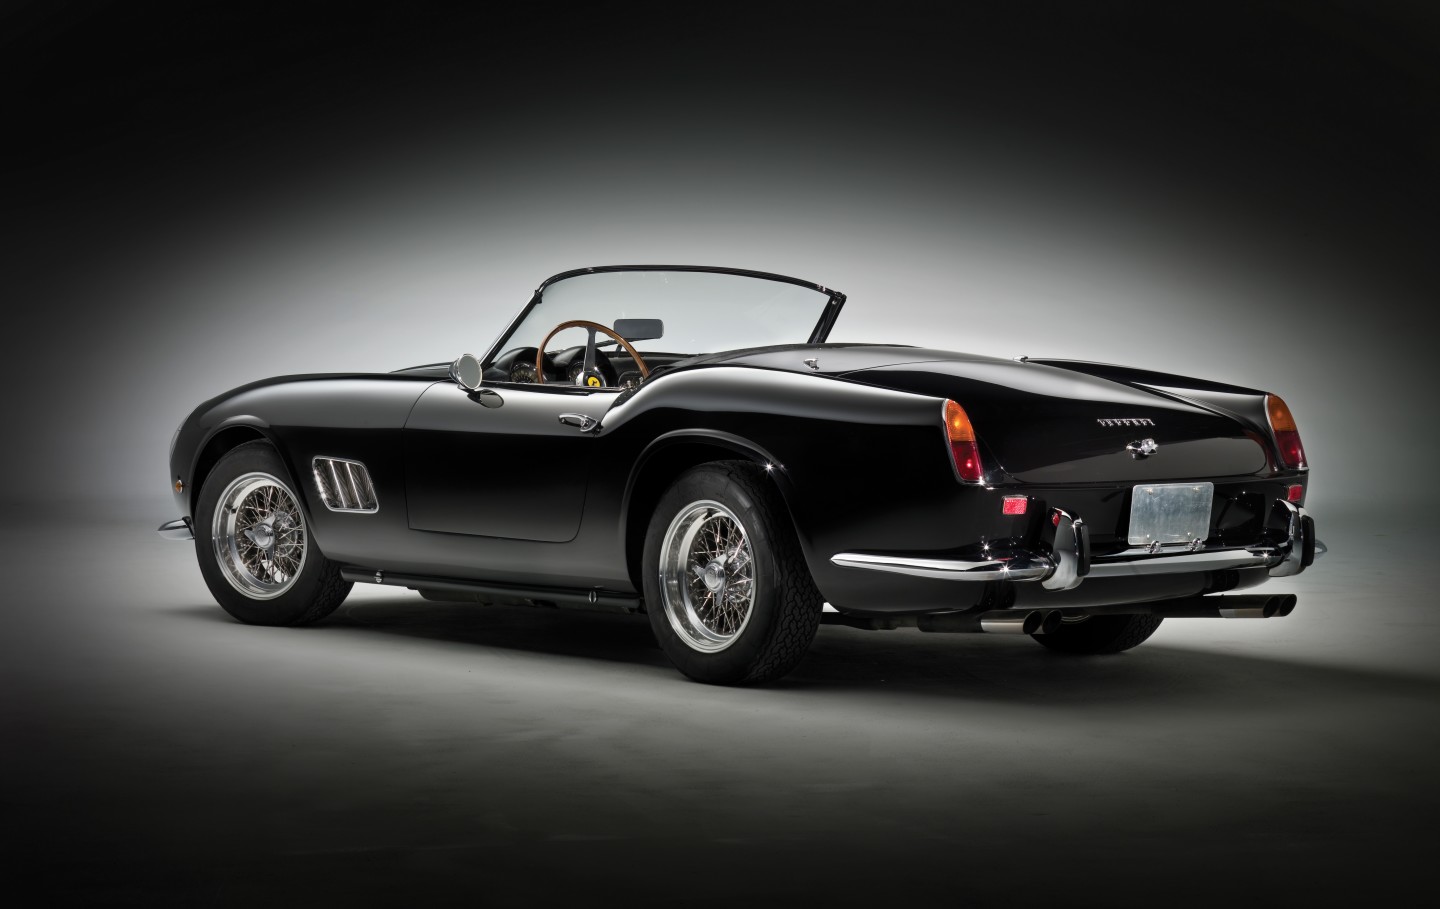 The first incarnation of the 250GT California Spider finished fifth outright in the 1959 24 Hours of ours of Le Mans. Hours of Le Mans. In 1961, Ferrari shortened the wheelbase to offer razor-sharp steering, replaced the drums with disc brakes, and the 276 hp three-litre SWB California was born. This car is one of the best known of the limited edition SWB Californias.